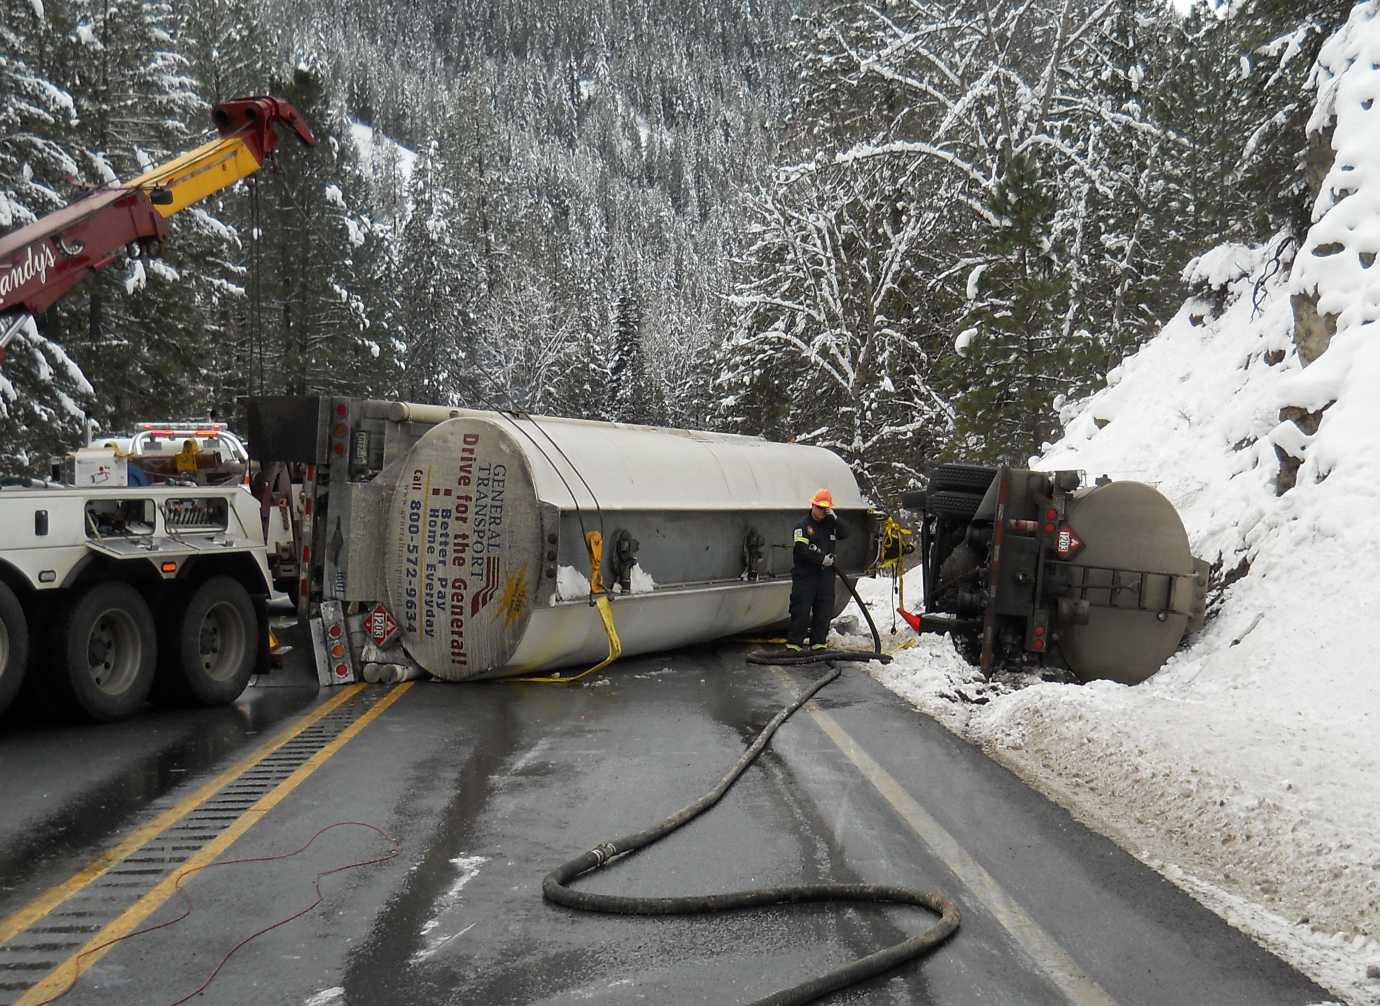 Tanker Spill in mountains